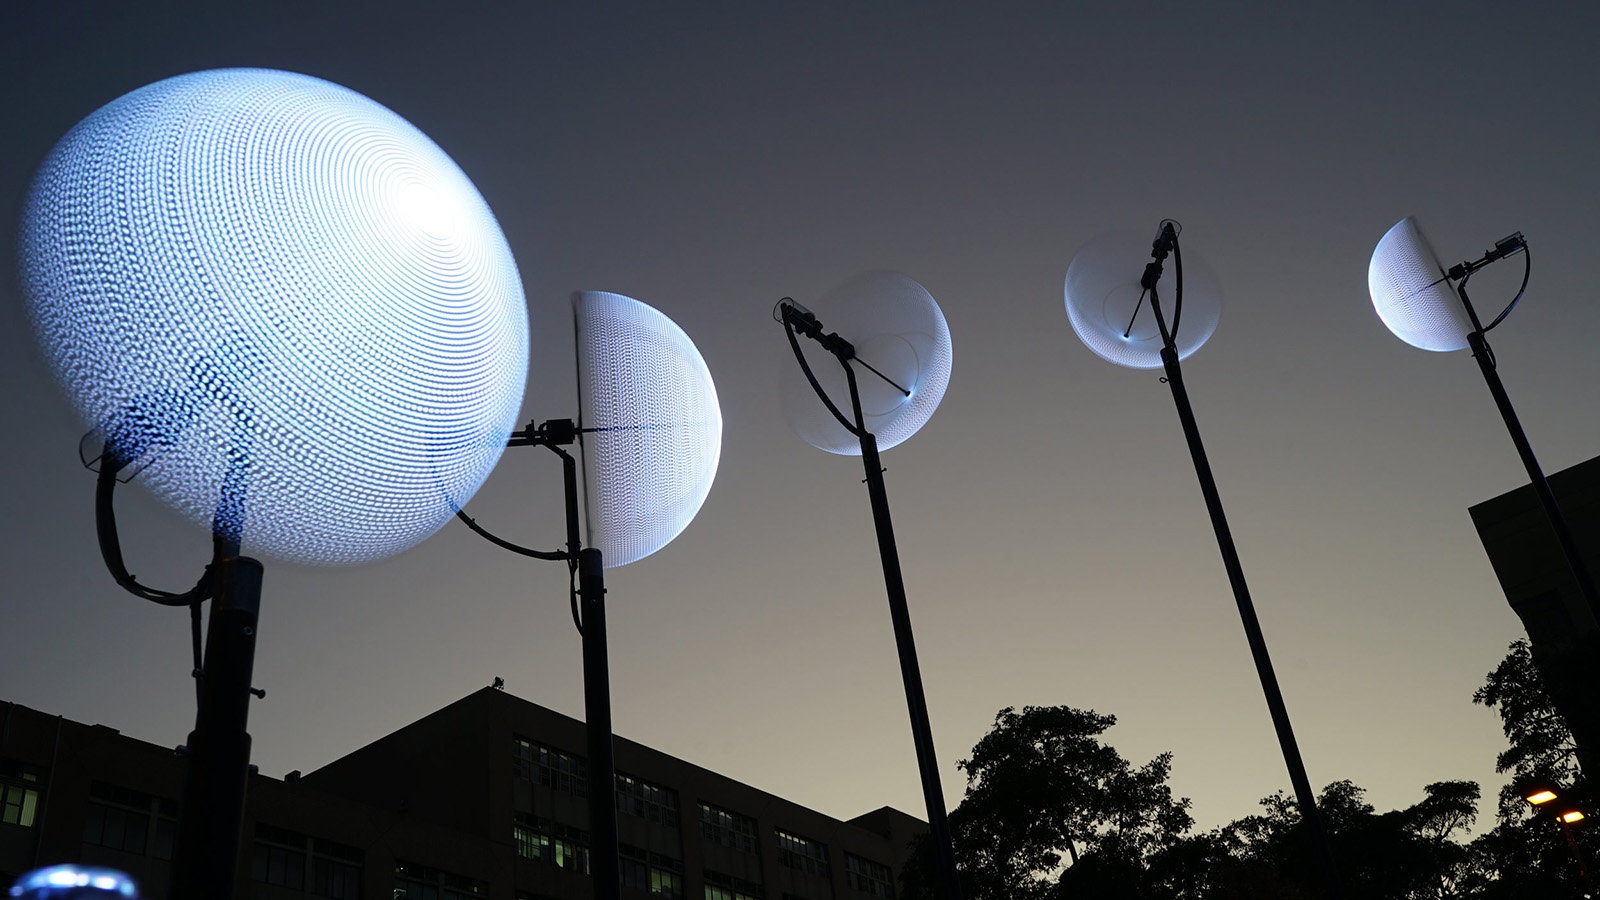 Rotating LEDs reveal the moon as art subject and inspiration | DeviceDaily.com